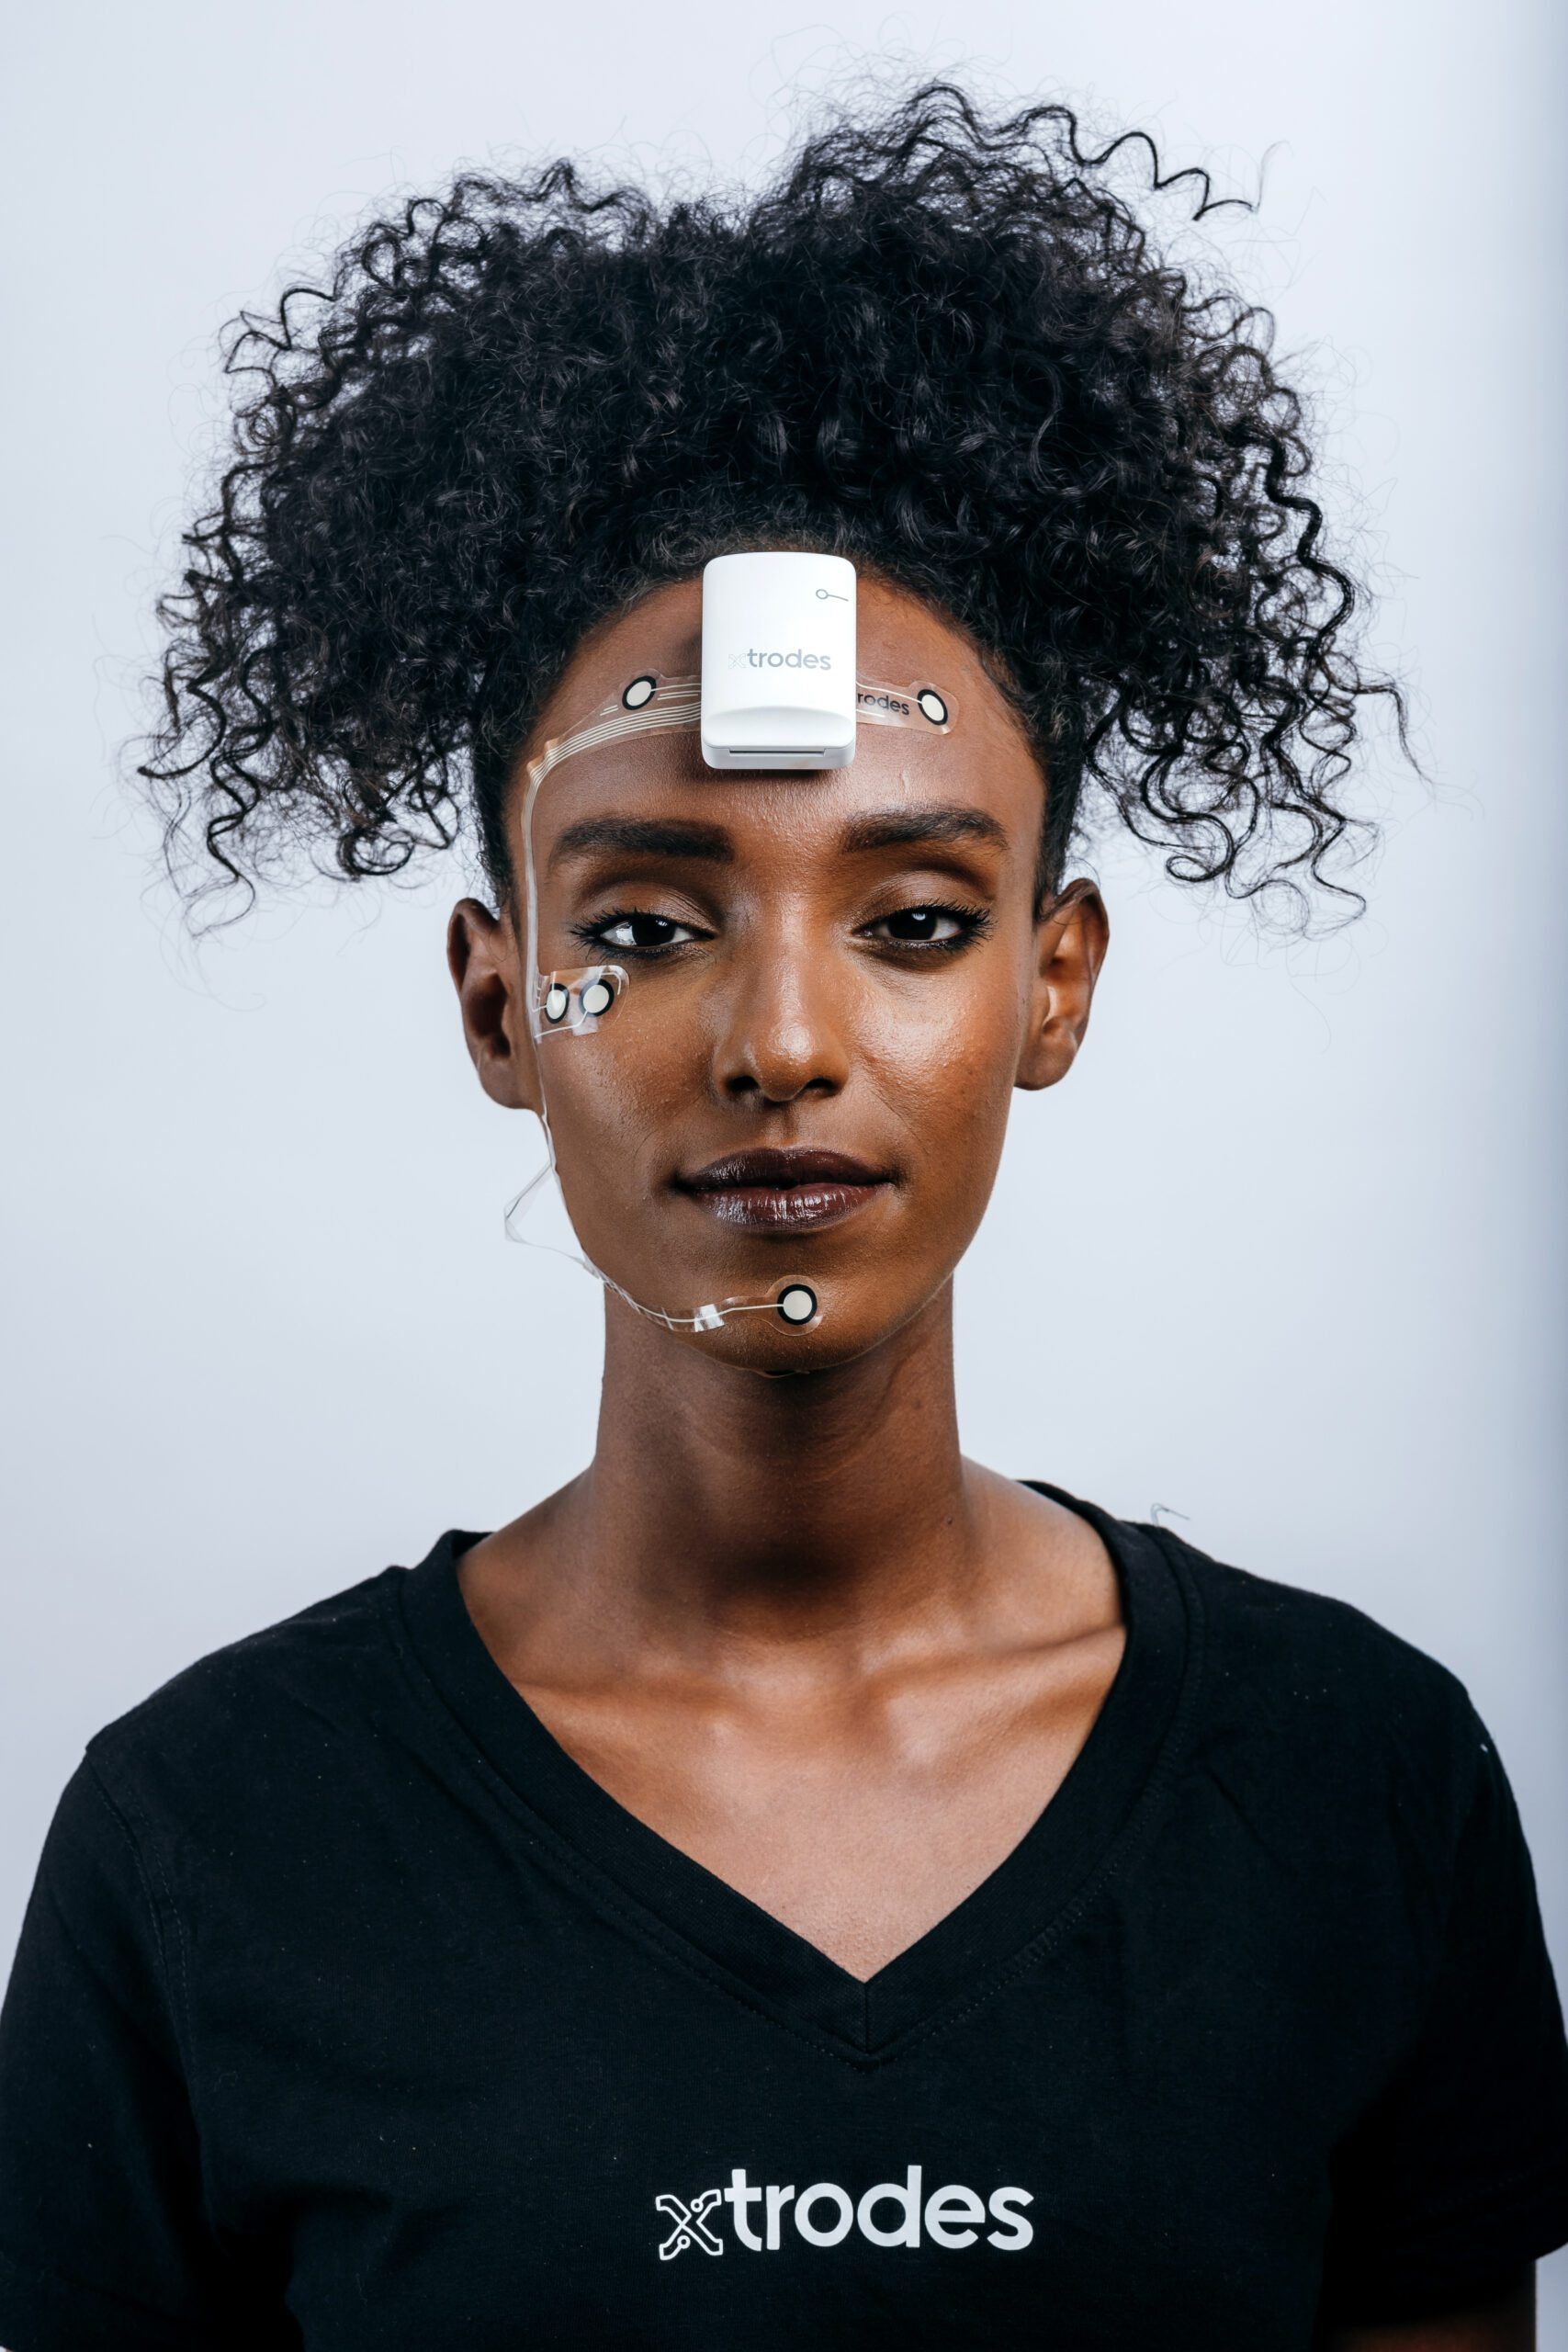 X-trodes' Smart Skin Earns FDA Clearance for Home-Based Electrophysiological Monitoring